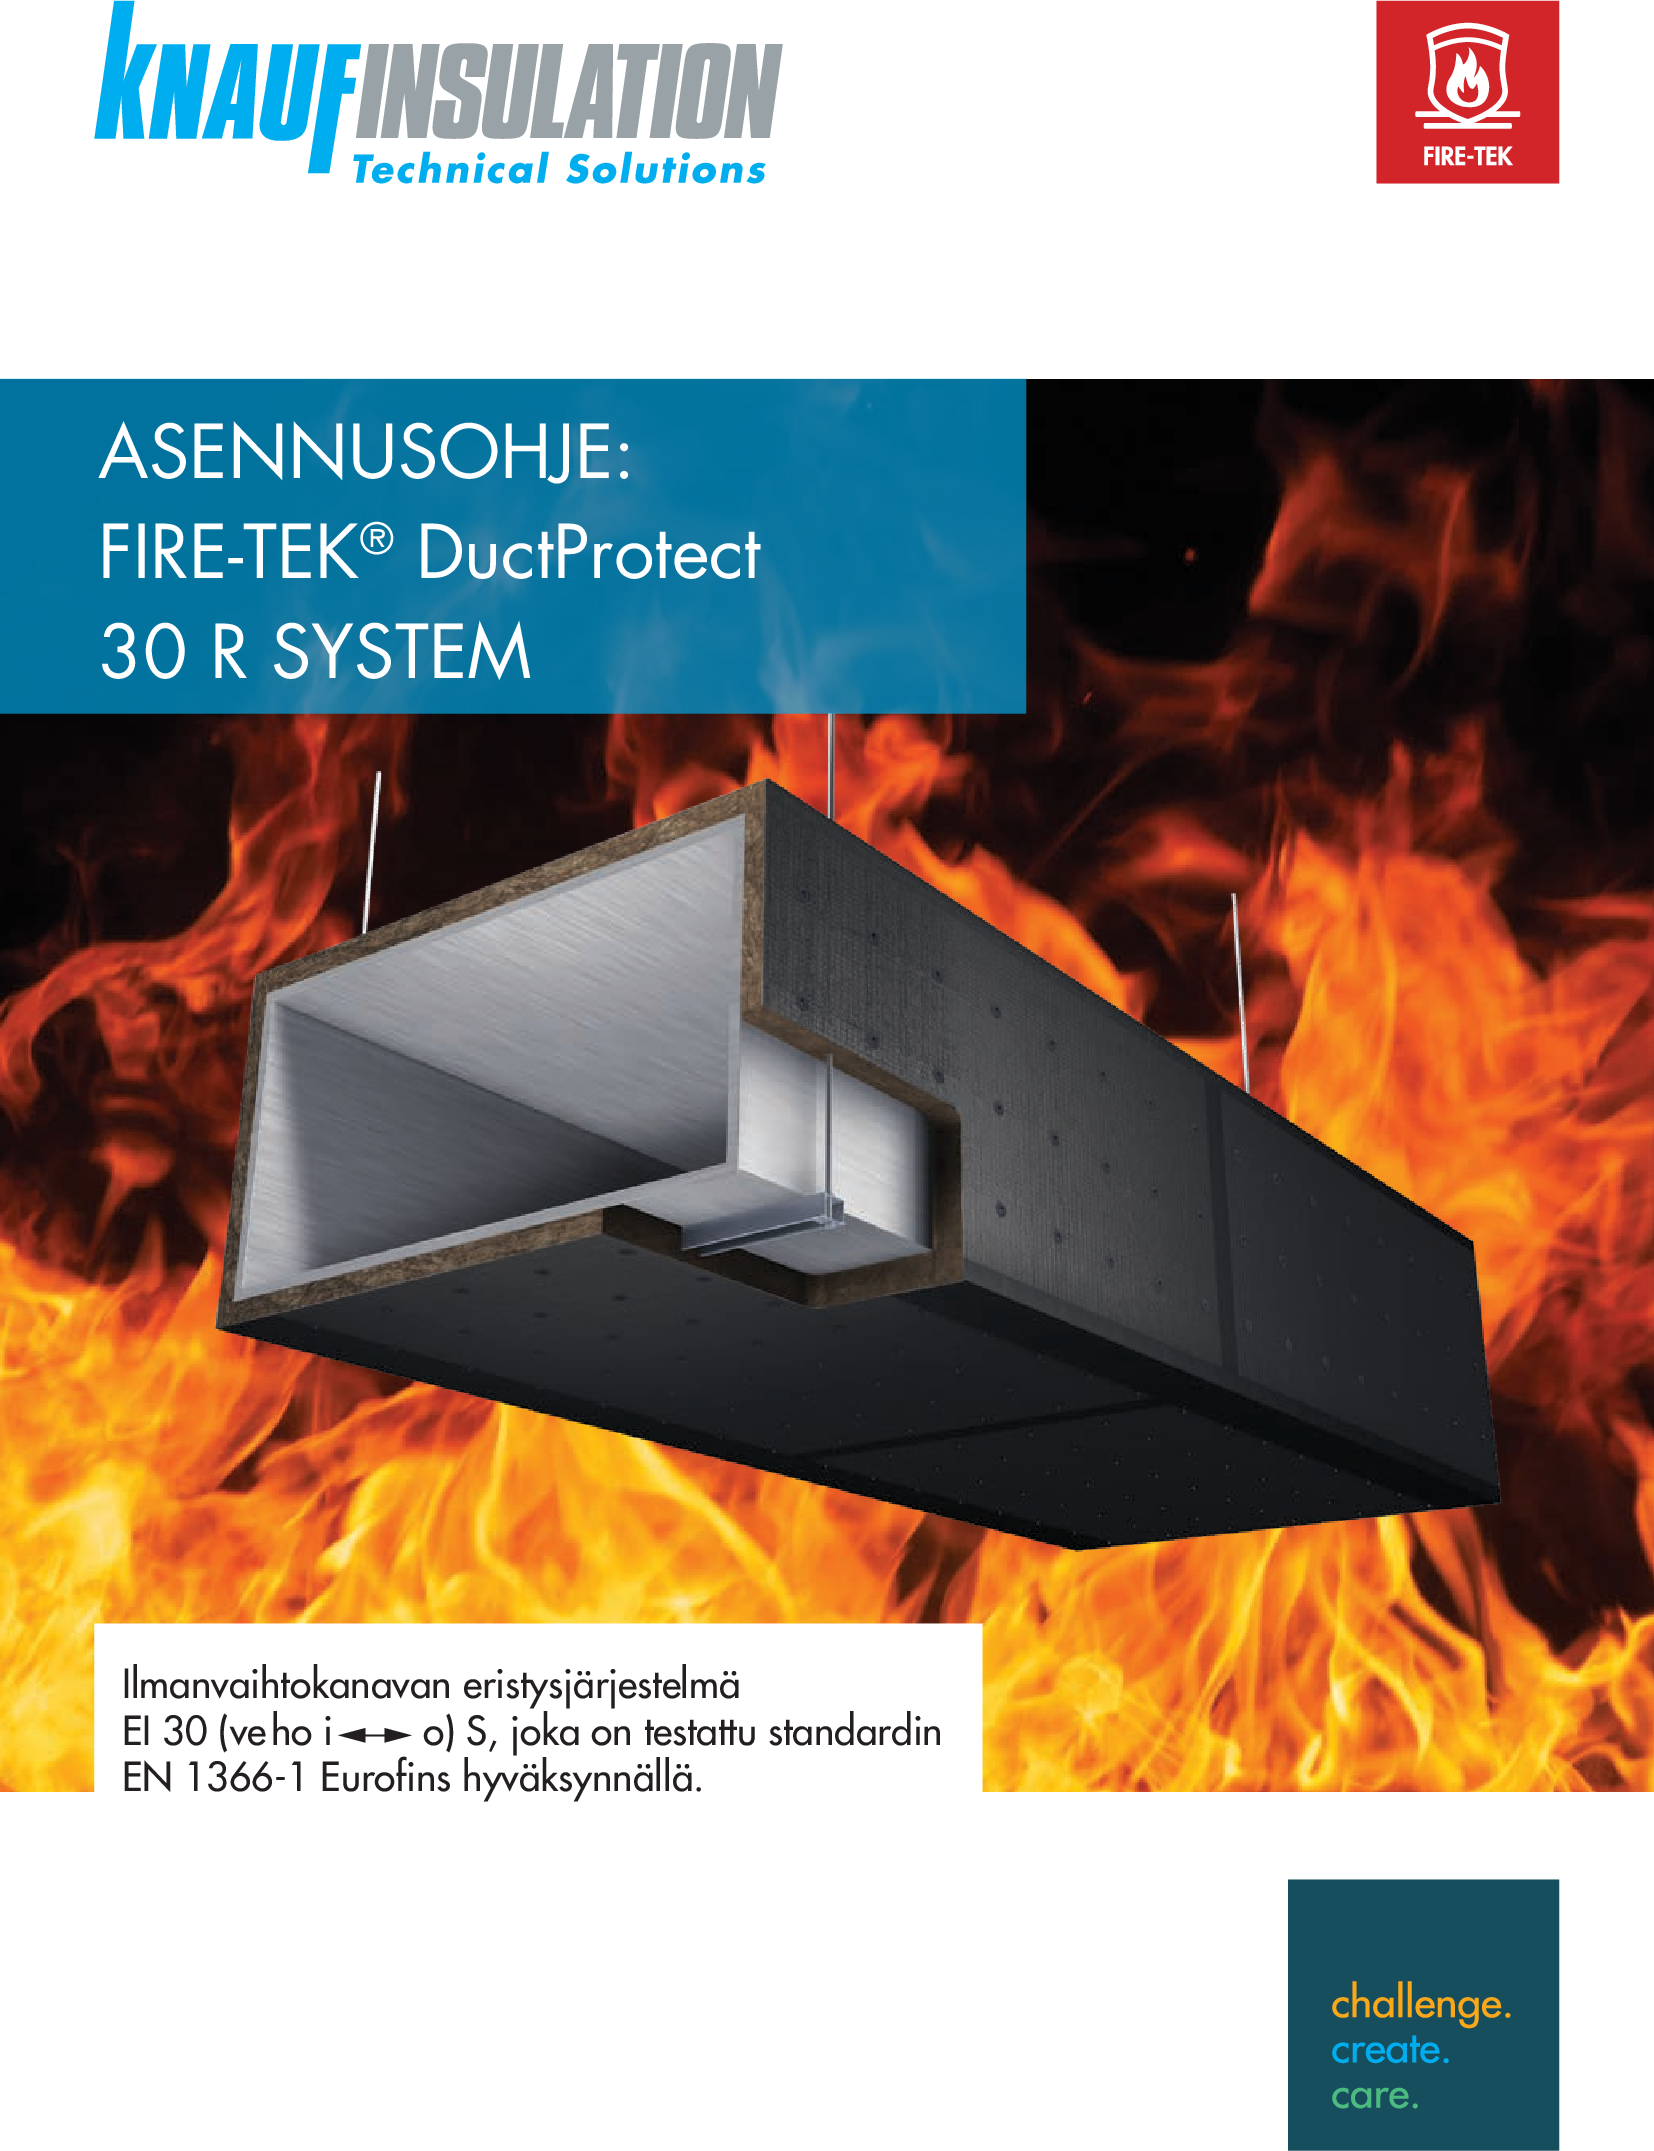 Fire-teK DuctProtect 30 R SYS - Manual-FI_022022